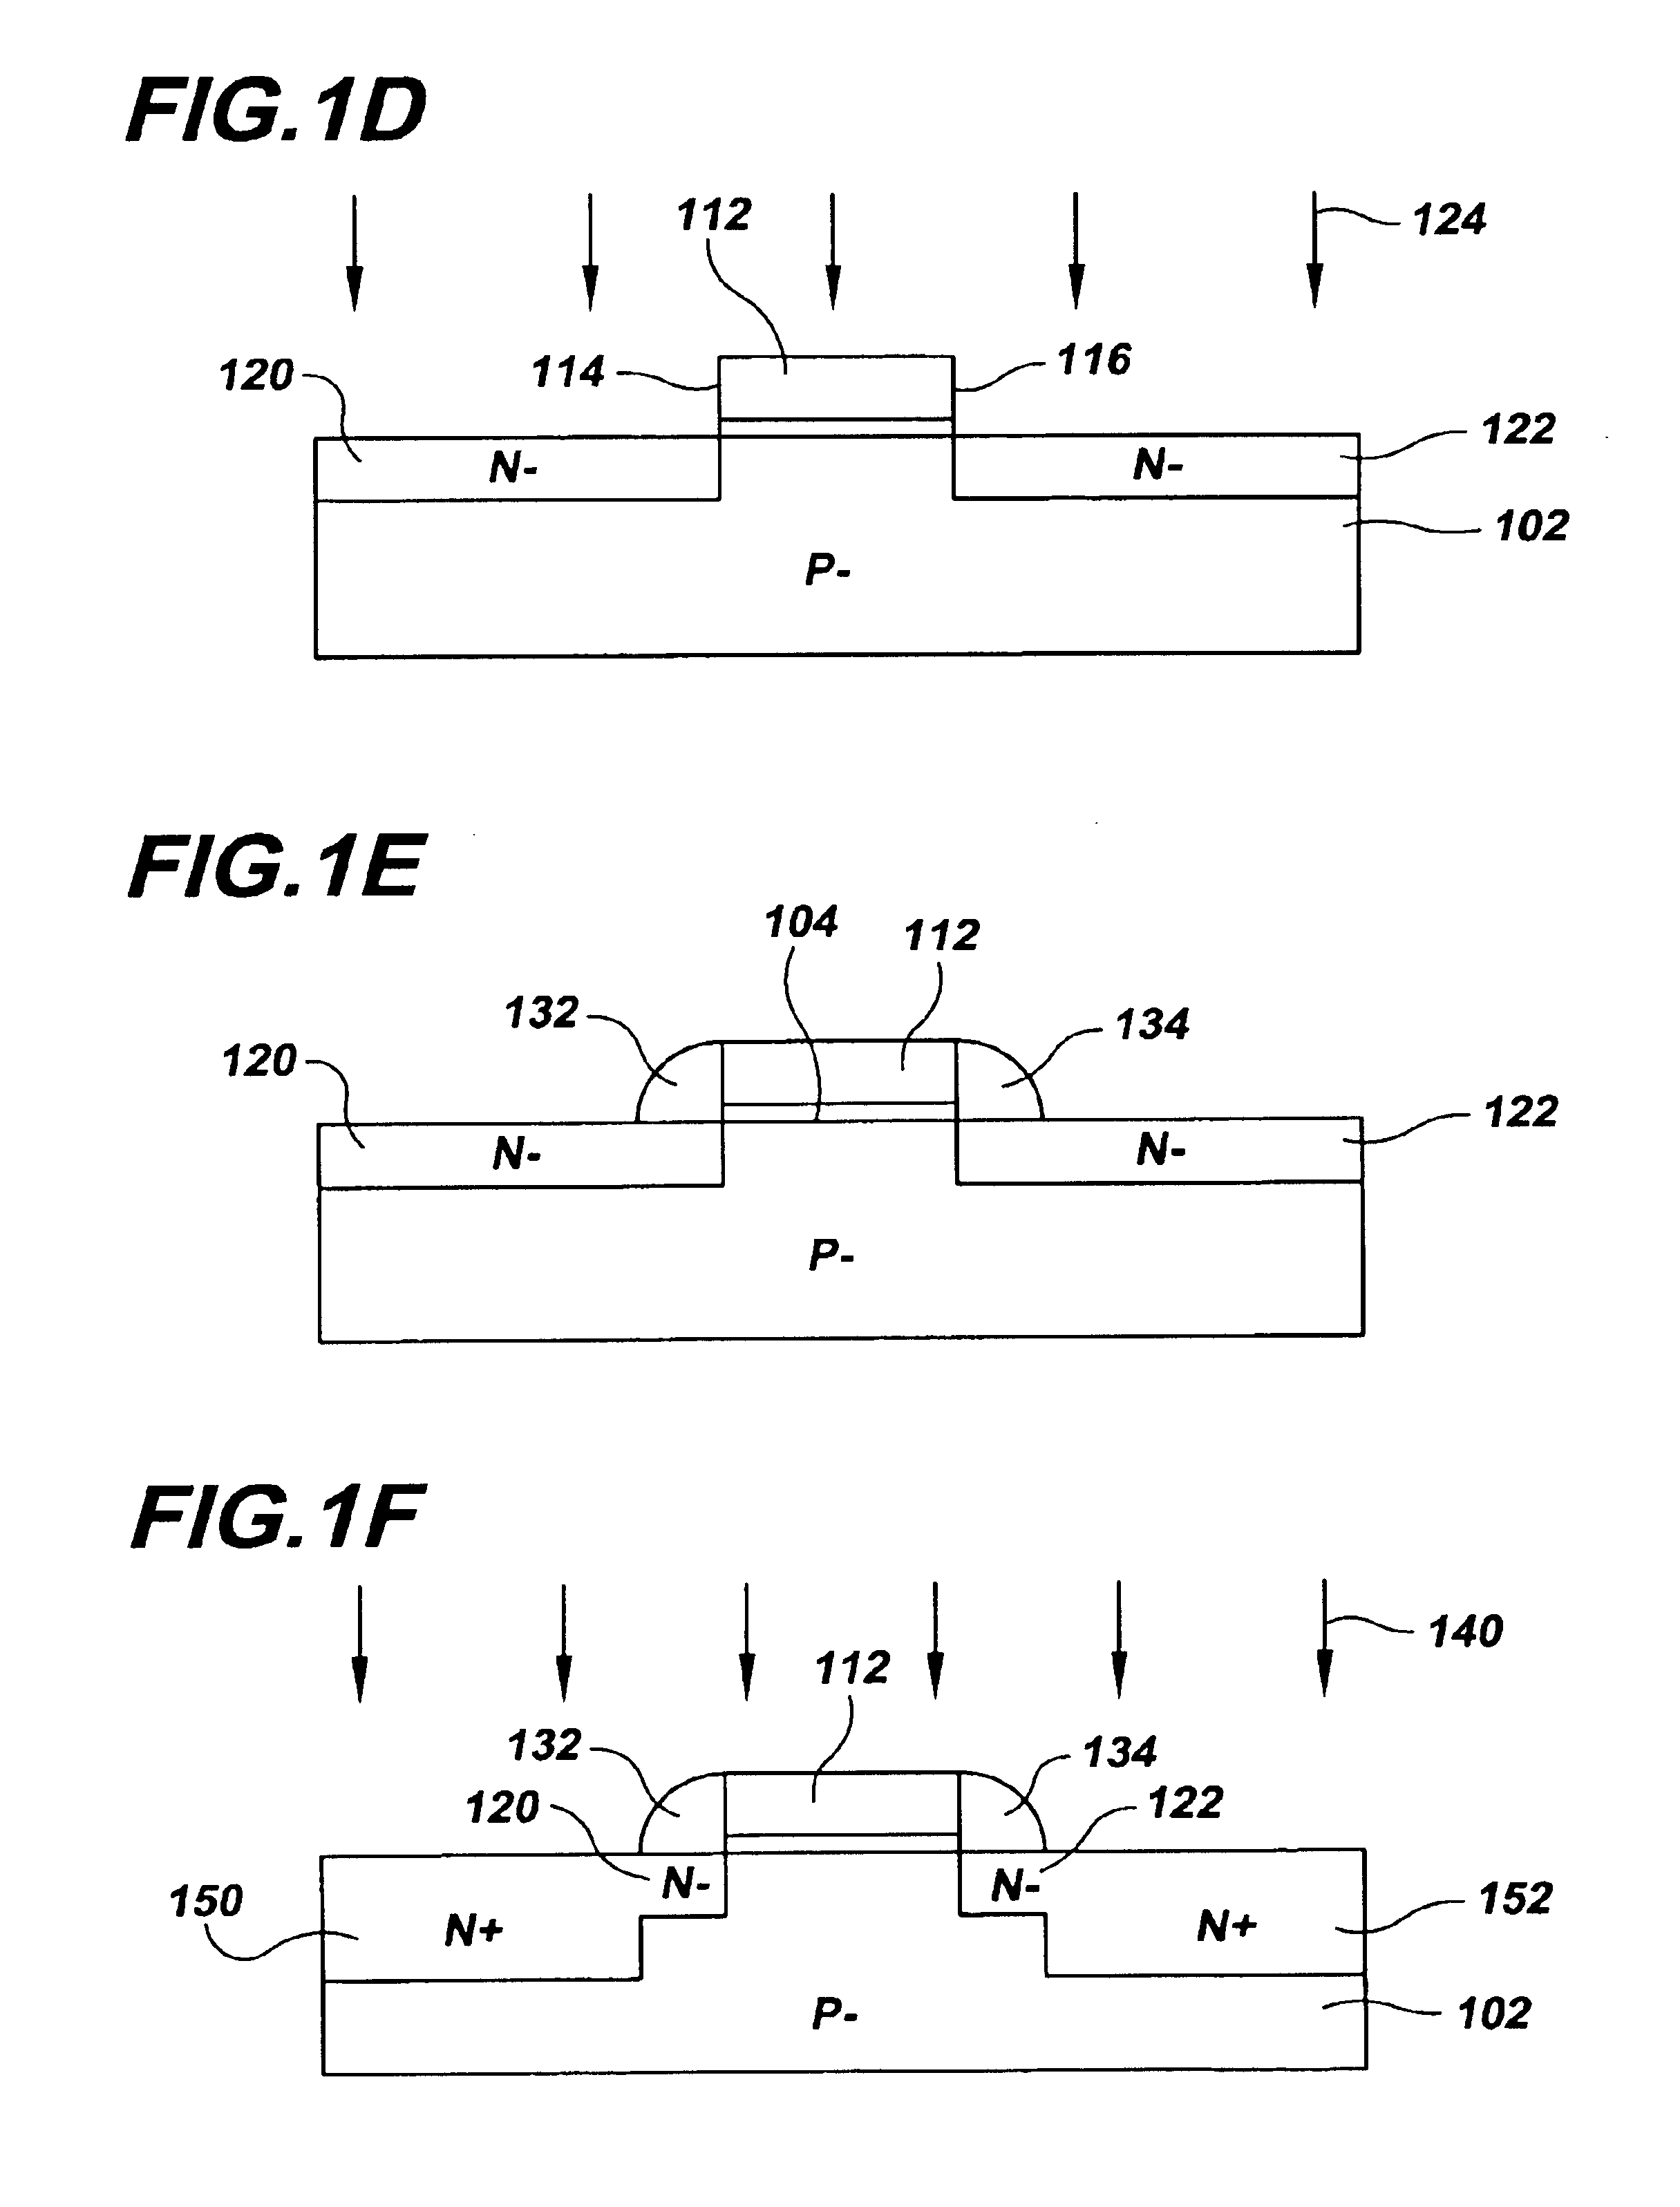 Method of making ultra thin oxide formation using selective etchback technique integrated with thin nitride layer for high performance MOSFET